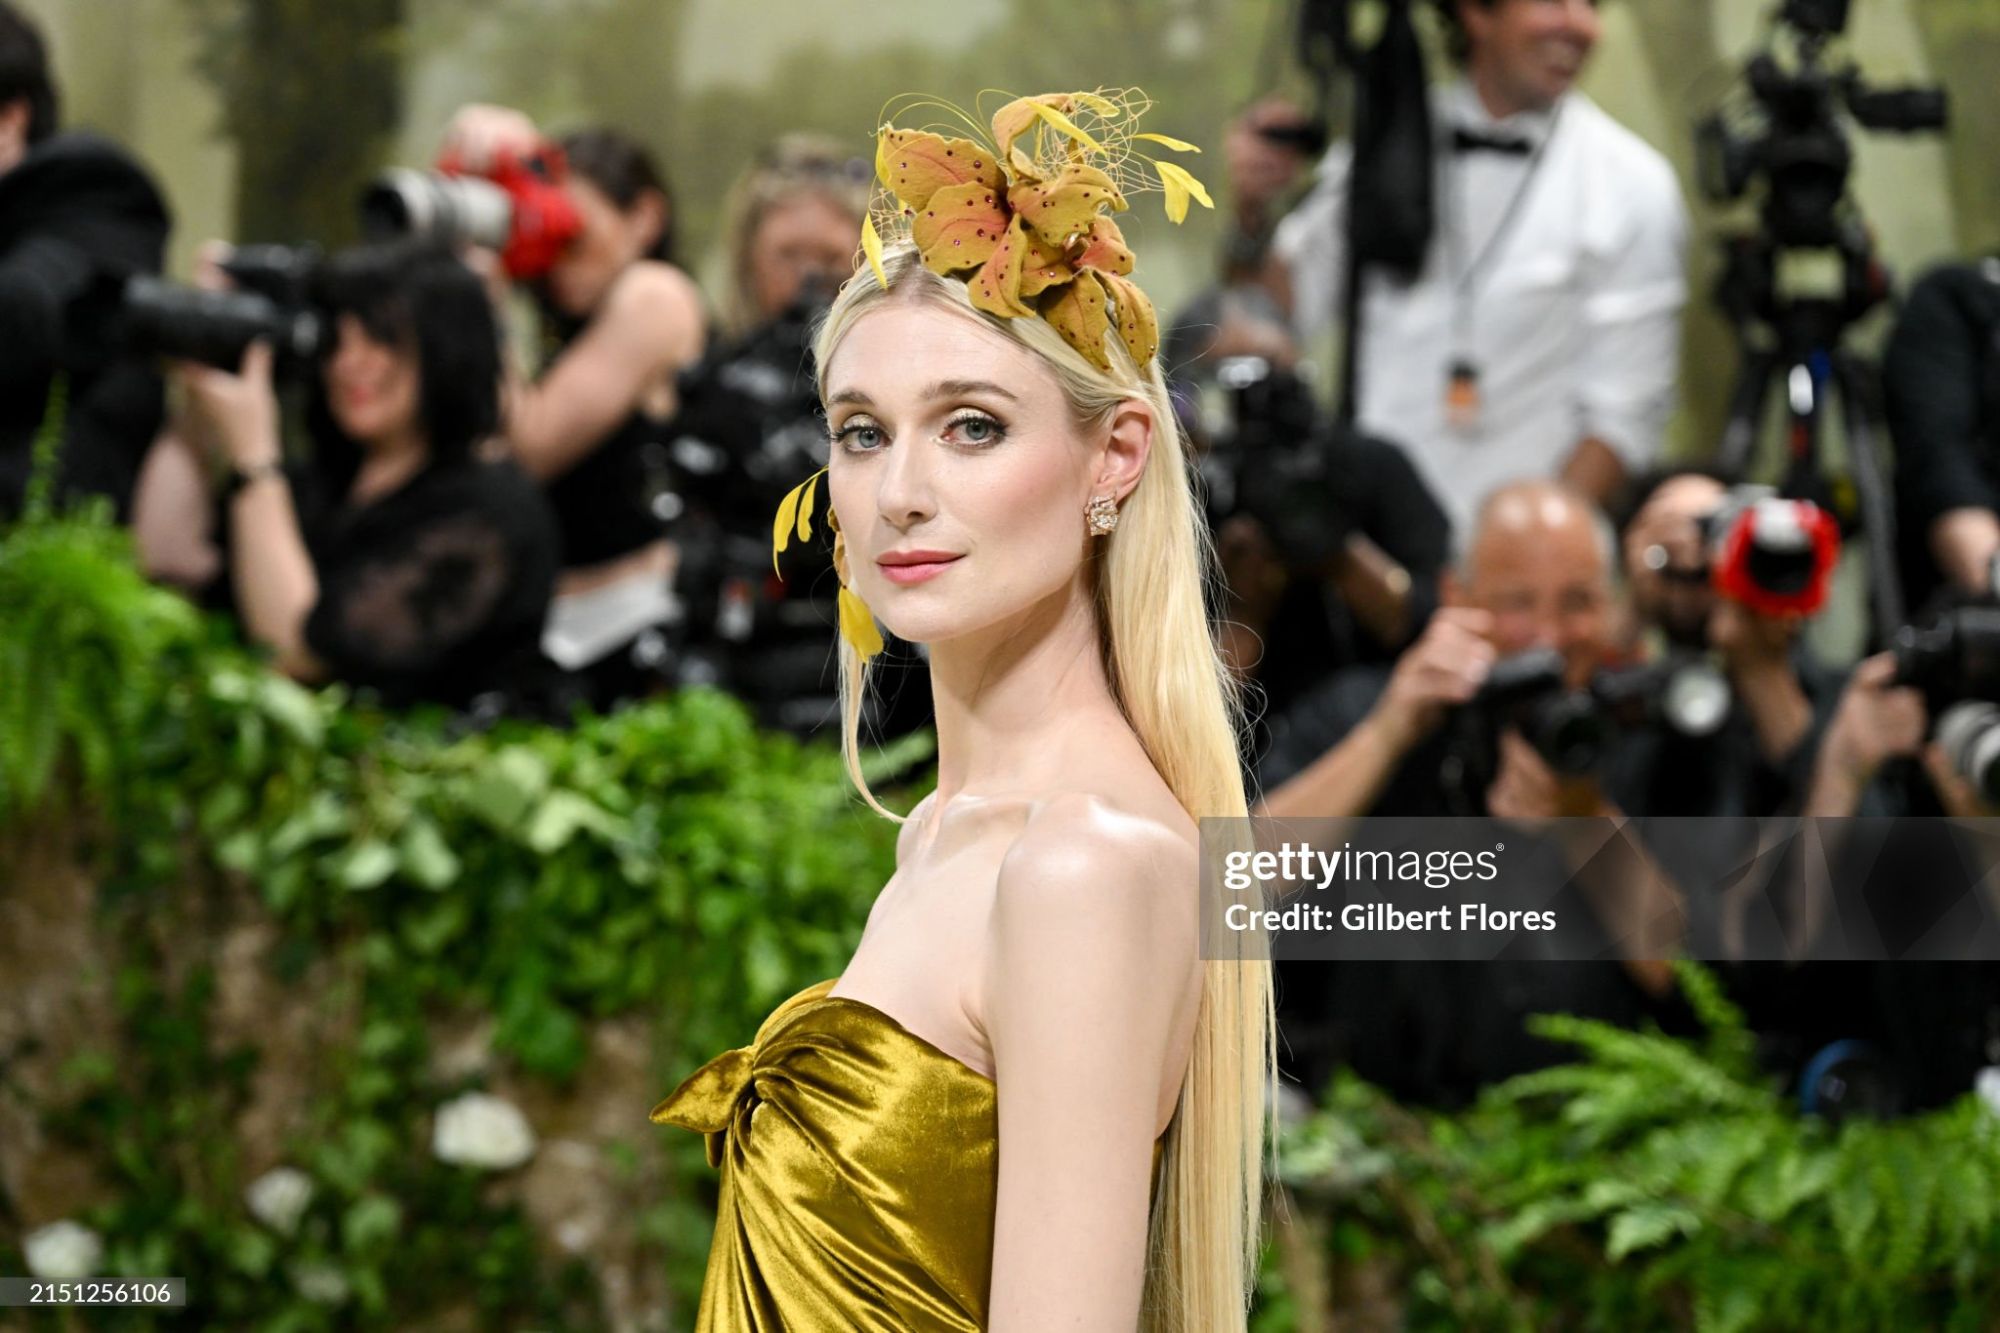 gettyimages-2151256106-2048x2048.jpg